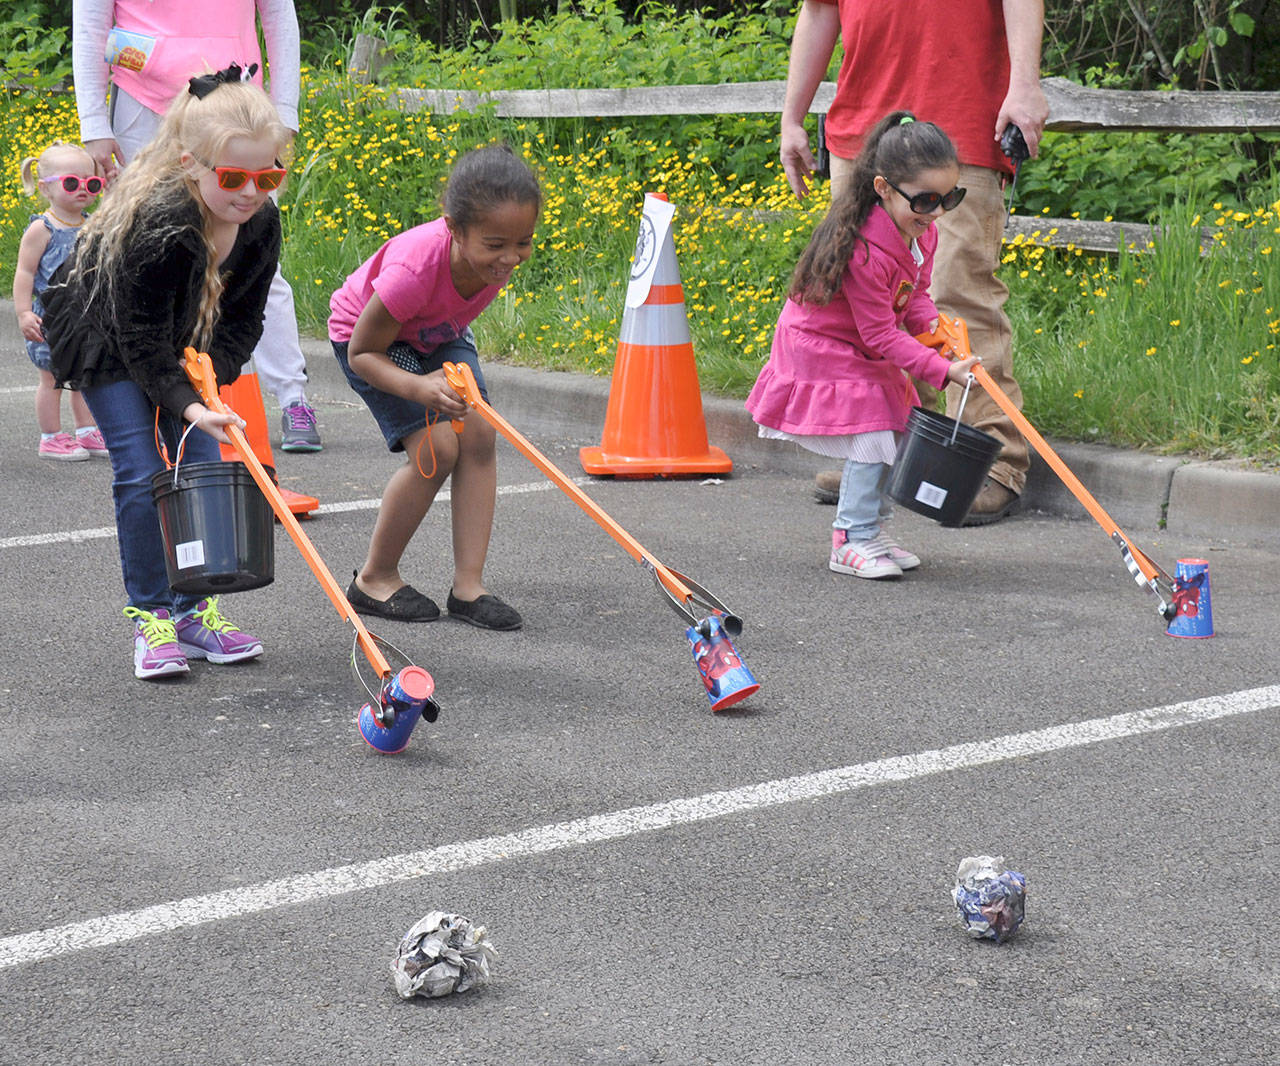 From left, Lauren Law, 6, Leilani Goodnow, 5, and Naomi Goodnow, 5, all of Kent, pick up cups during a garbage collection race. HEIDI SANDERS, Kent Reporter